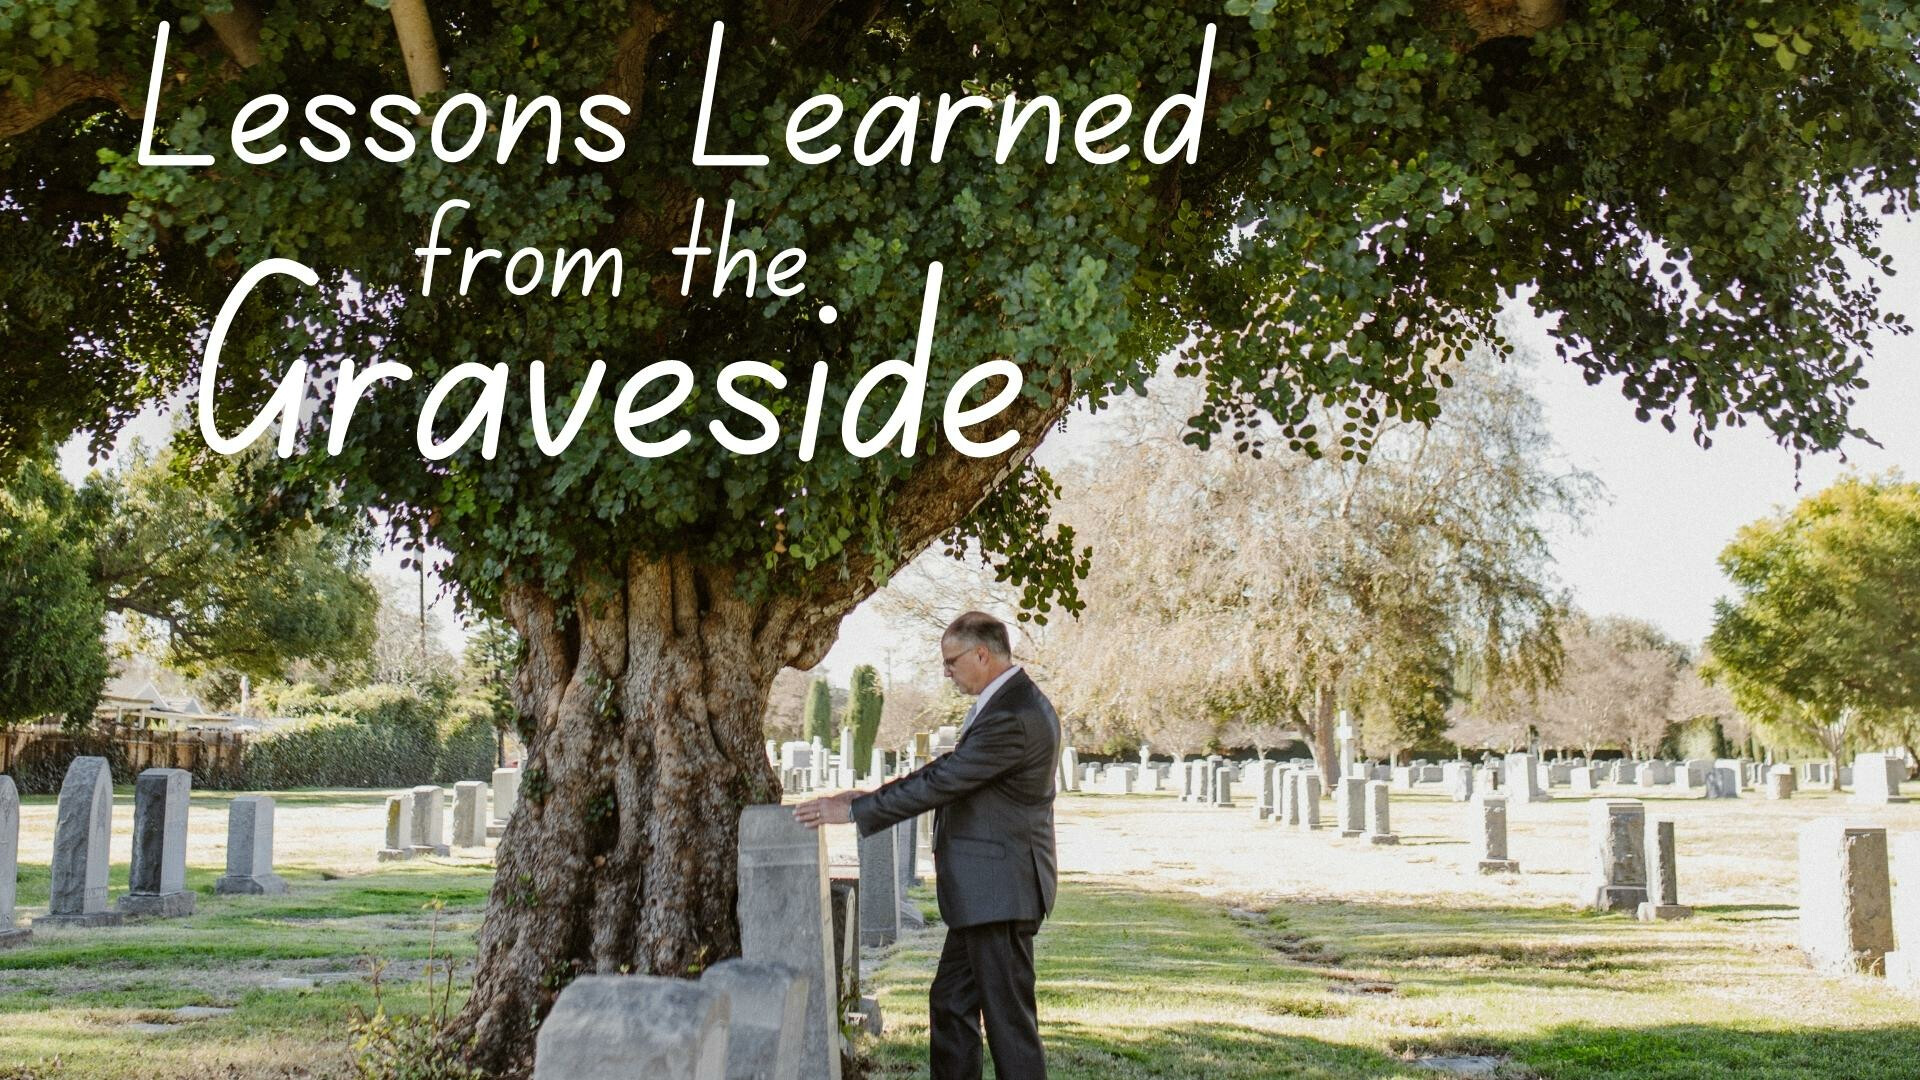 Lessons Learned from the Graveside